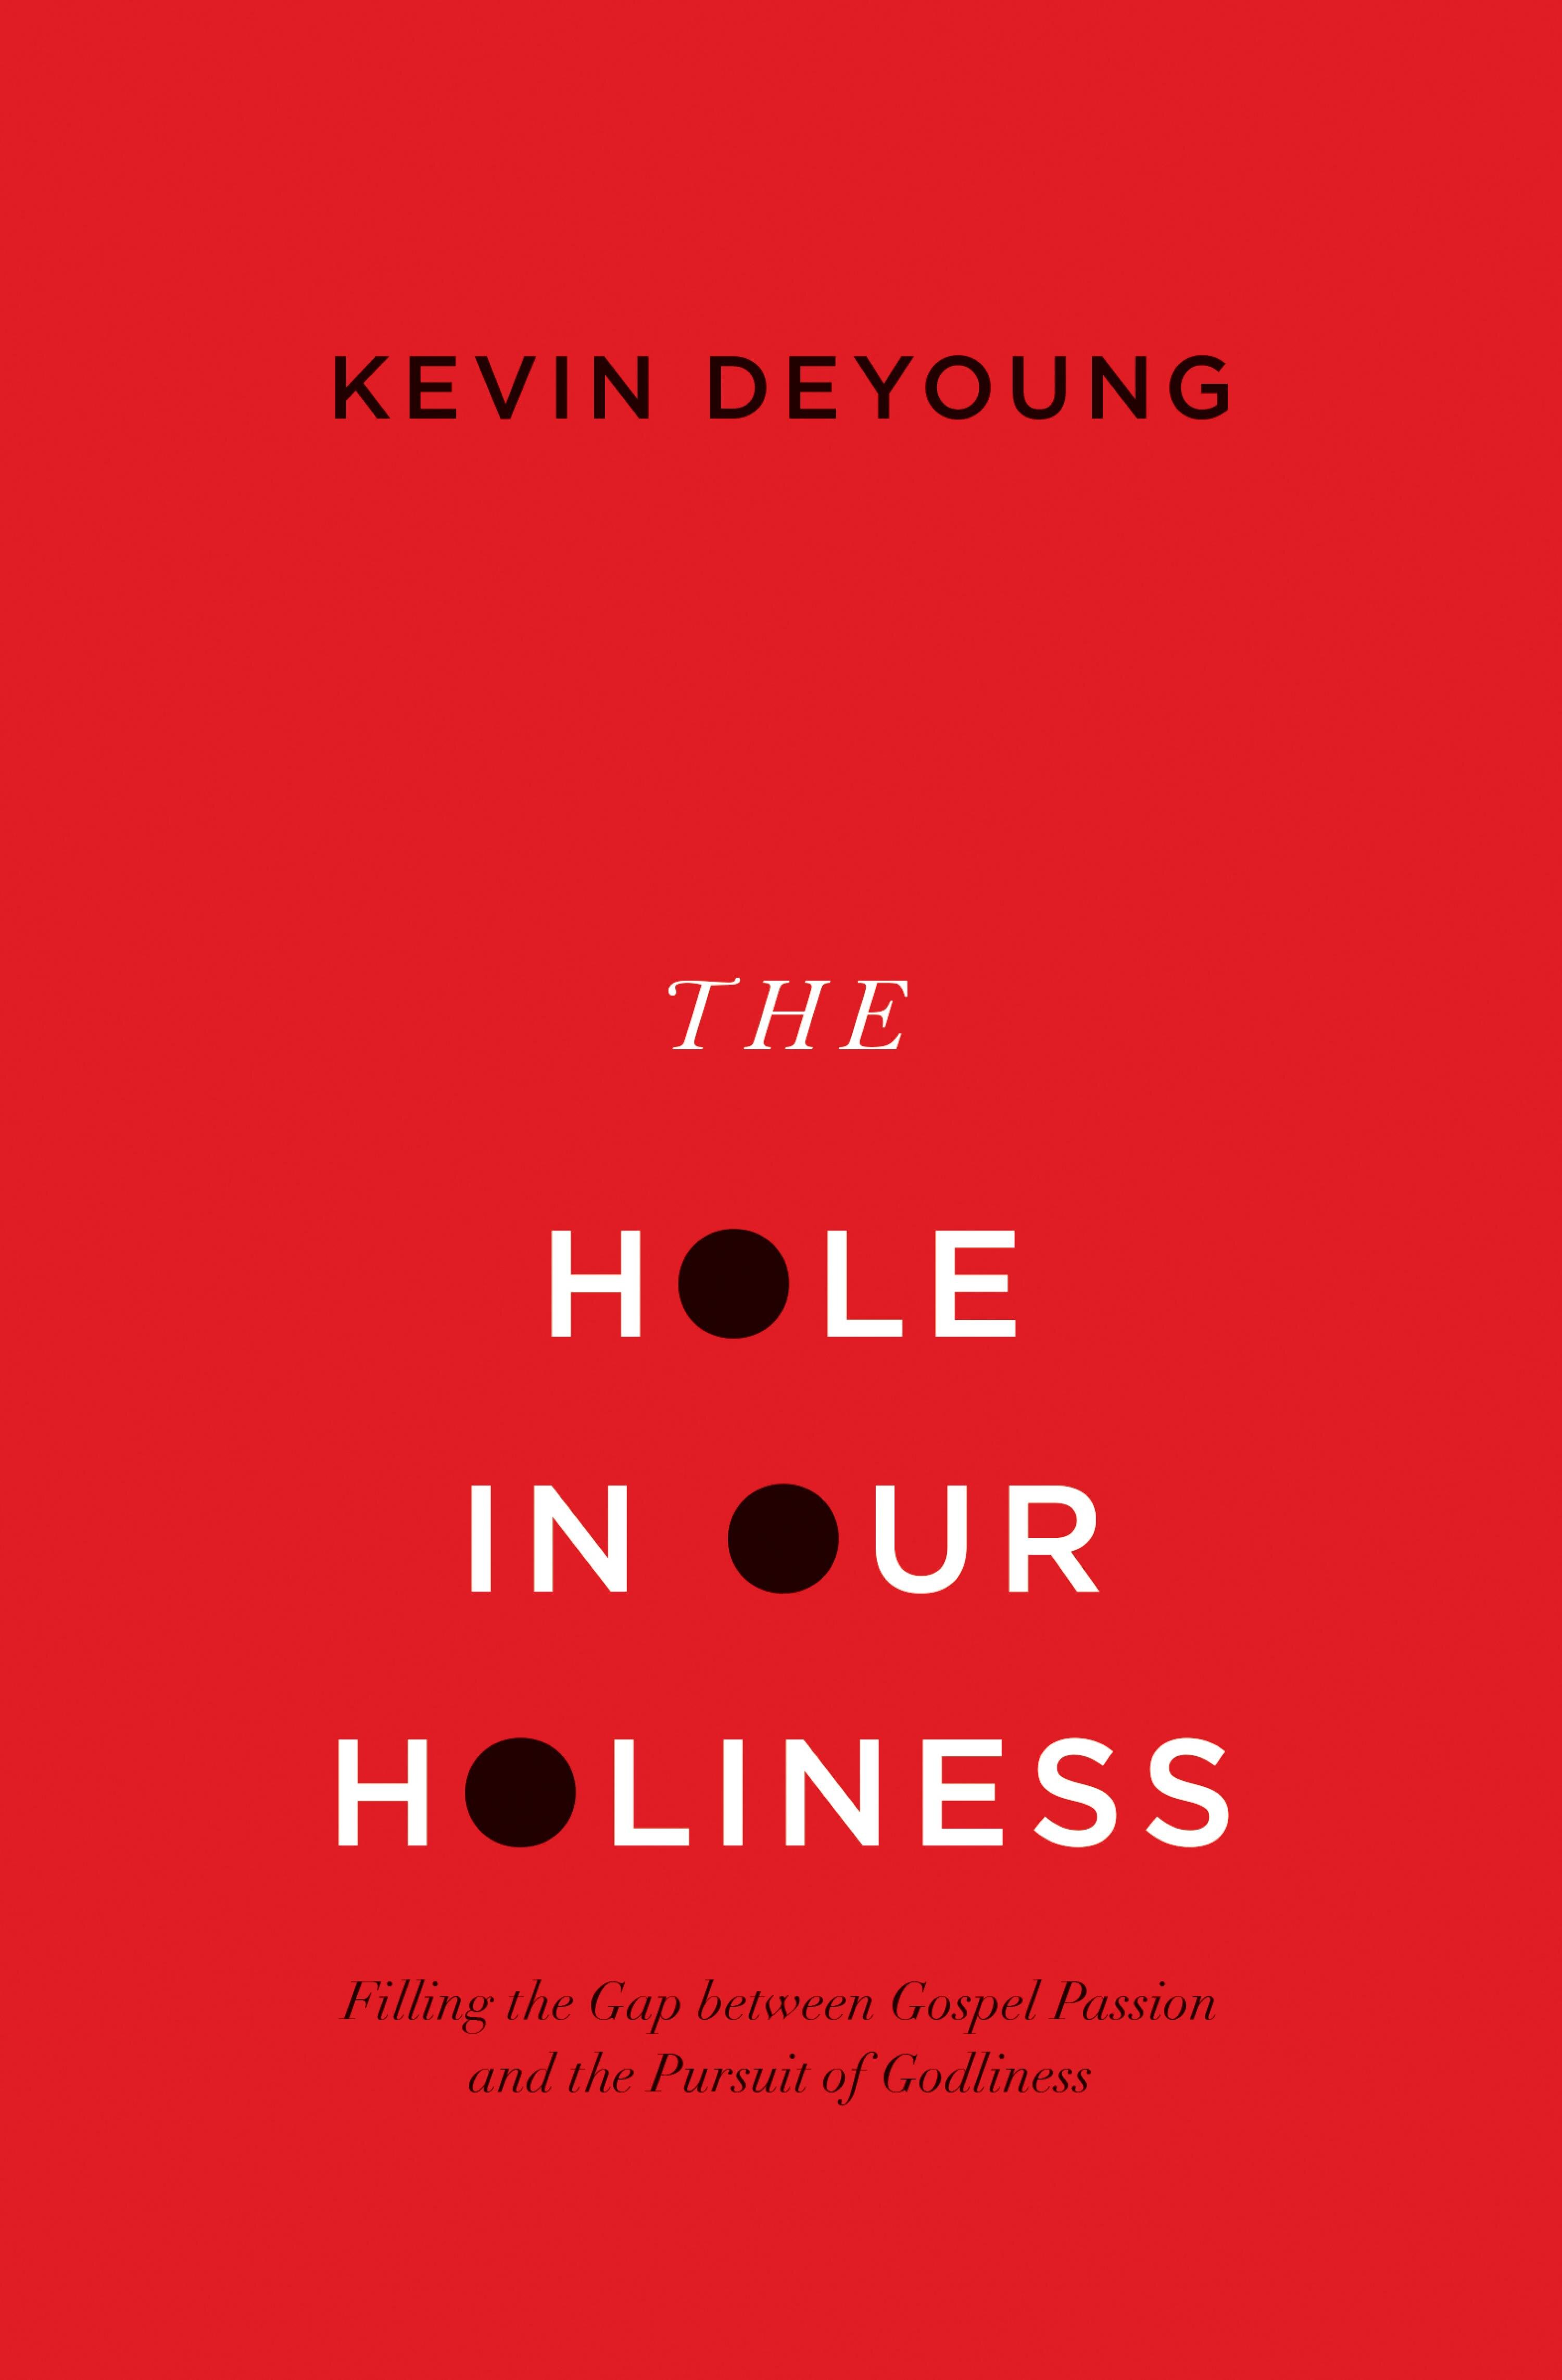 The Hole in Our Holiness: Filling the Gap between Gospel Passion and the Pursuit of Godliness